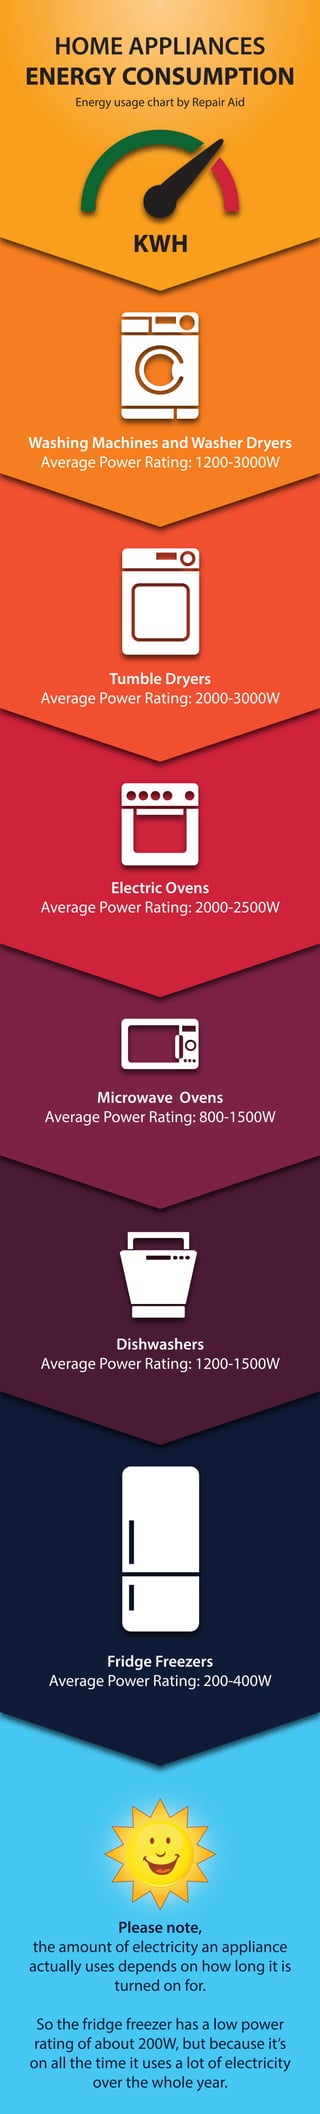 HOME APPLIANCES
ENERGY CONSUMPTION
KWH
Washing Machines and Washer Dryers
Average Power Rating: 1200-3000W
Energy usage chart by Repair Aid
Tumble Dryers
Average Power Rating: 2000-3000W
Electric Ovens
Average Power Rating: 2000-2500W
Microwave Ovens
Average Power Rating: 800-1500W
Dishwashers
Average Power Rating: 1200-1500W
Fridge Freezers
Average Power Rating: 200-400W
Please note,
the amount of electricity an appliance
actually uses depends on how long it is
turned on for.
So the fridge freezer has a low power
rating of about 200W, but because it’s
on all the time it uses a lot of electricity
over the whole year.
 